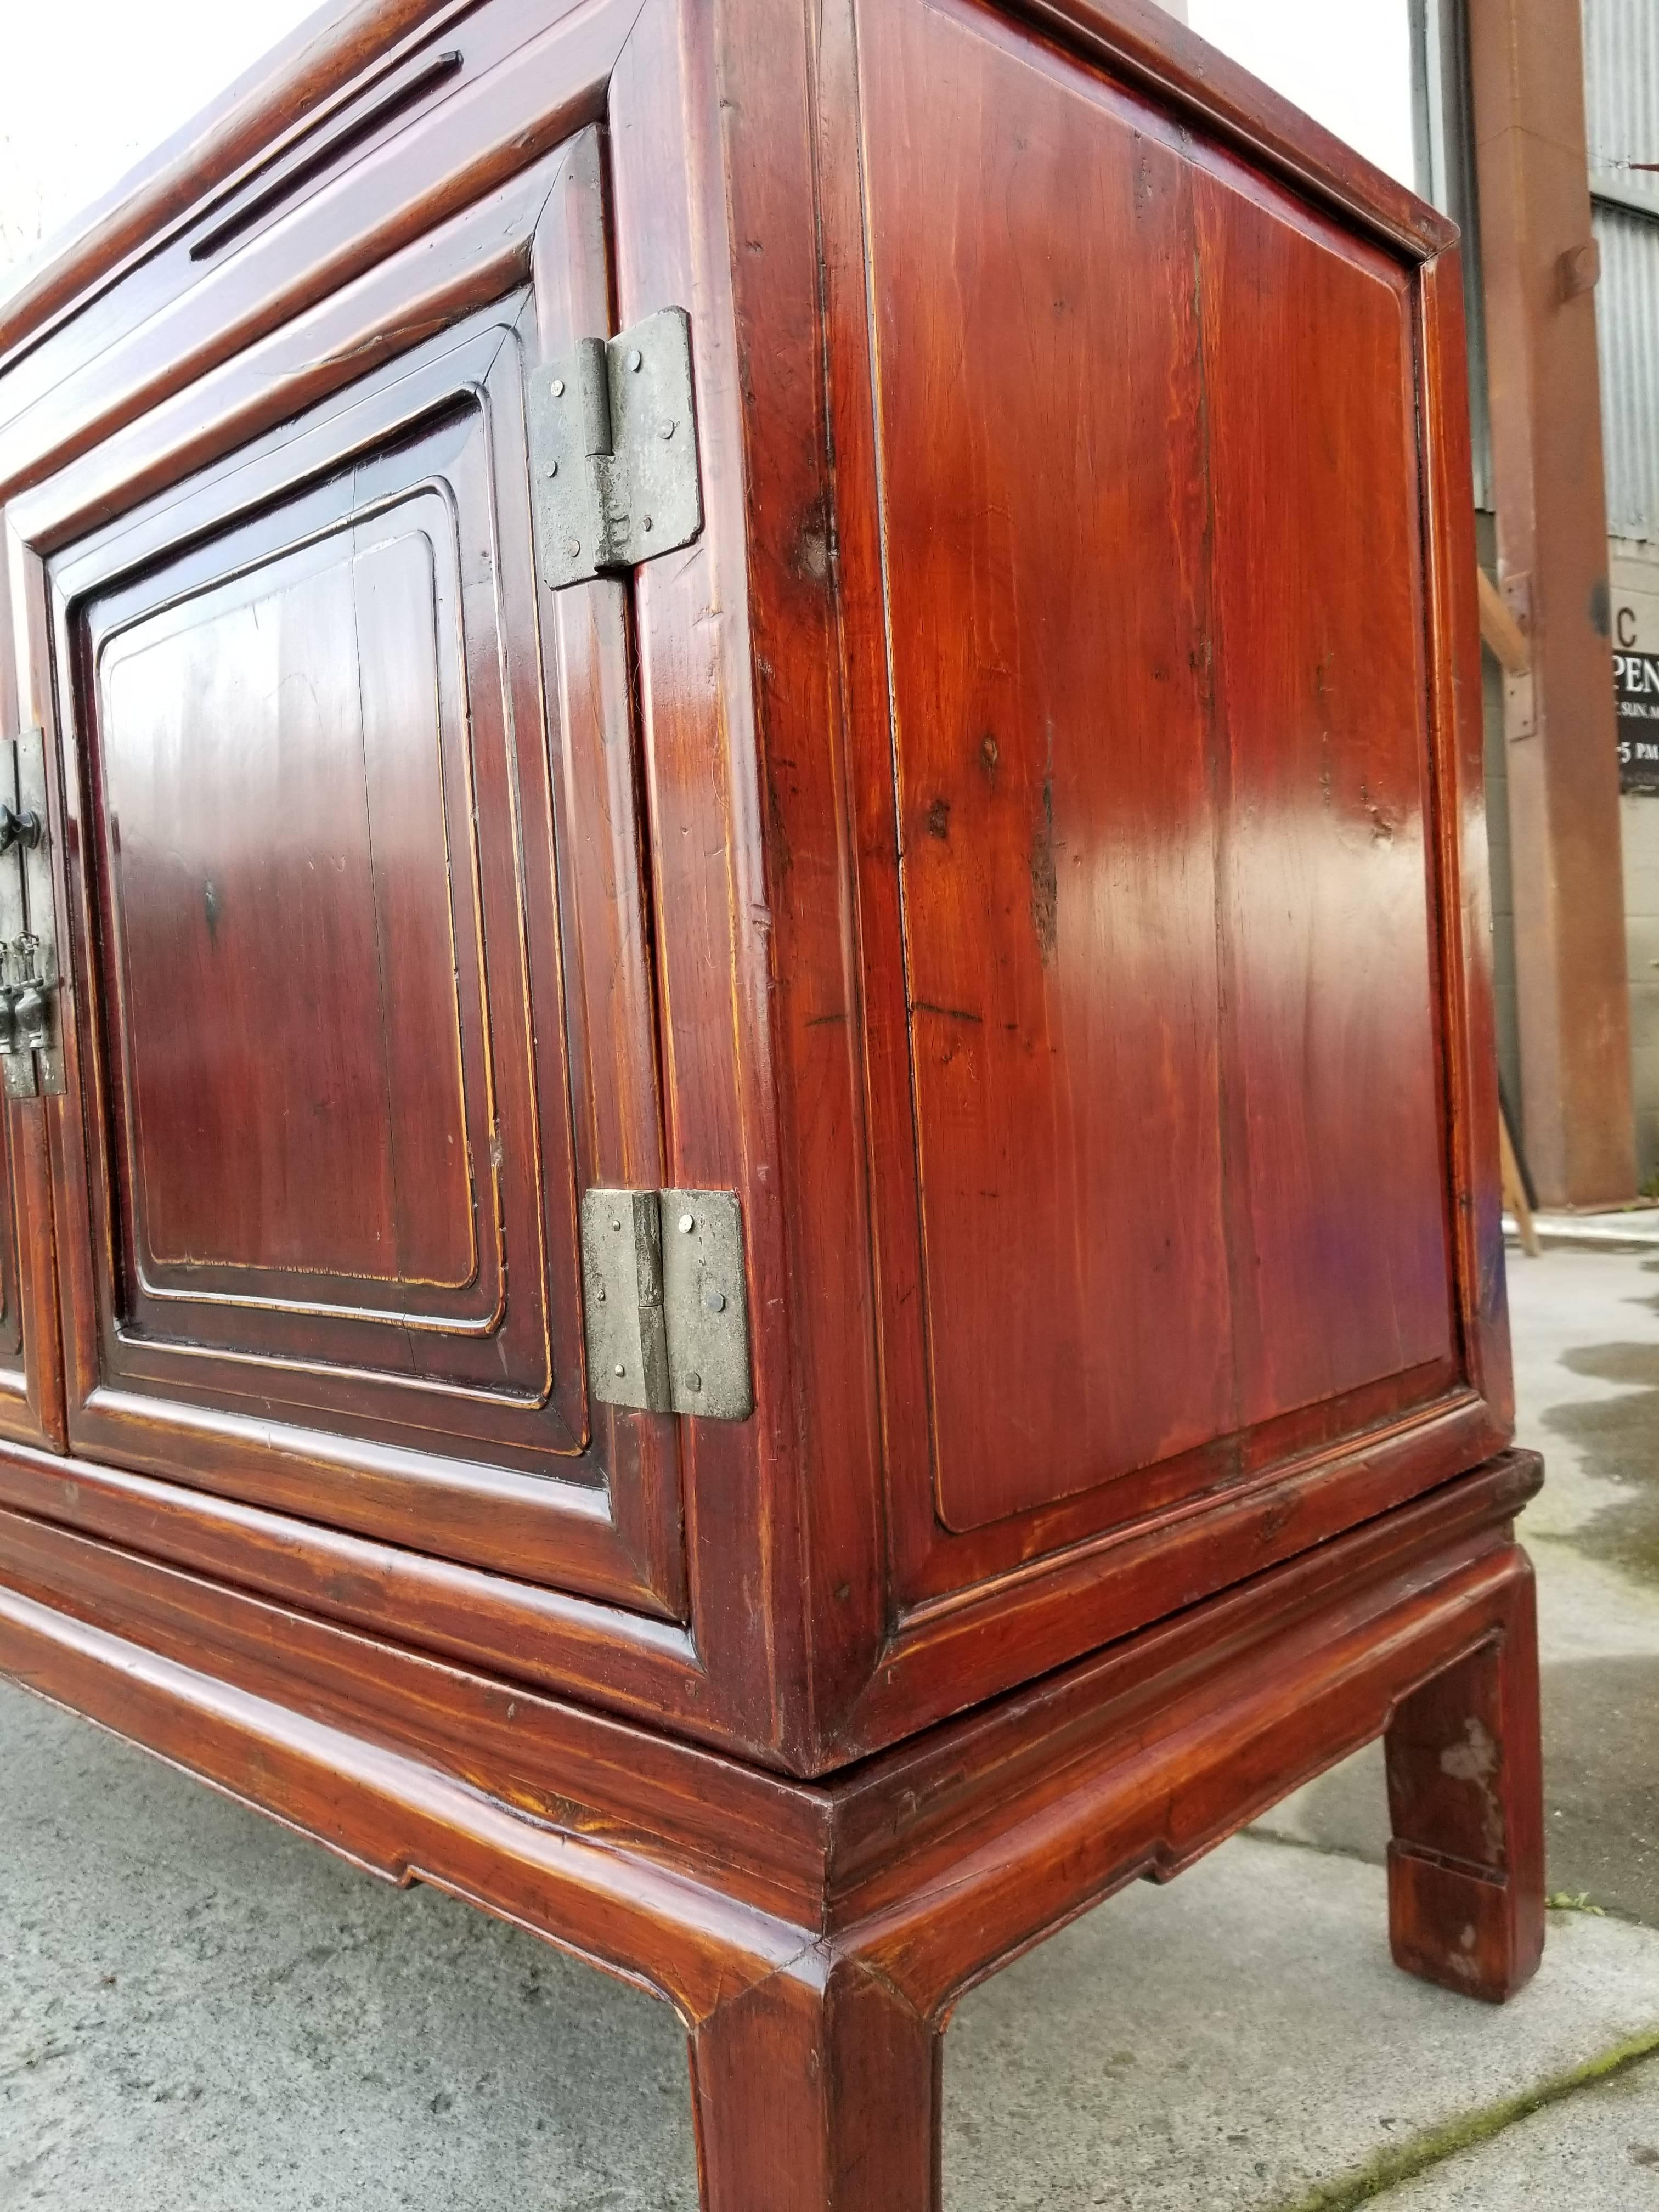 Qing Dynasty Storage Cabinet In Good Condition For Sale In Fulton, CA